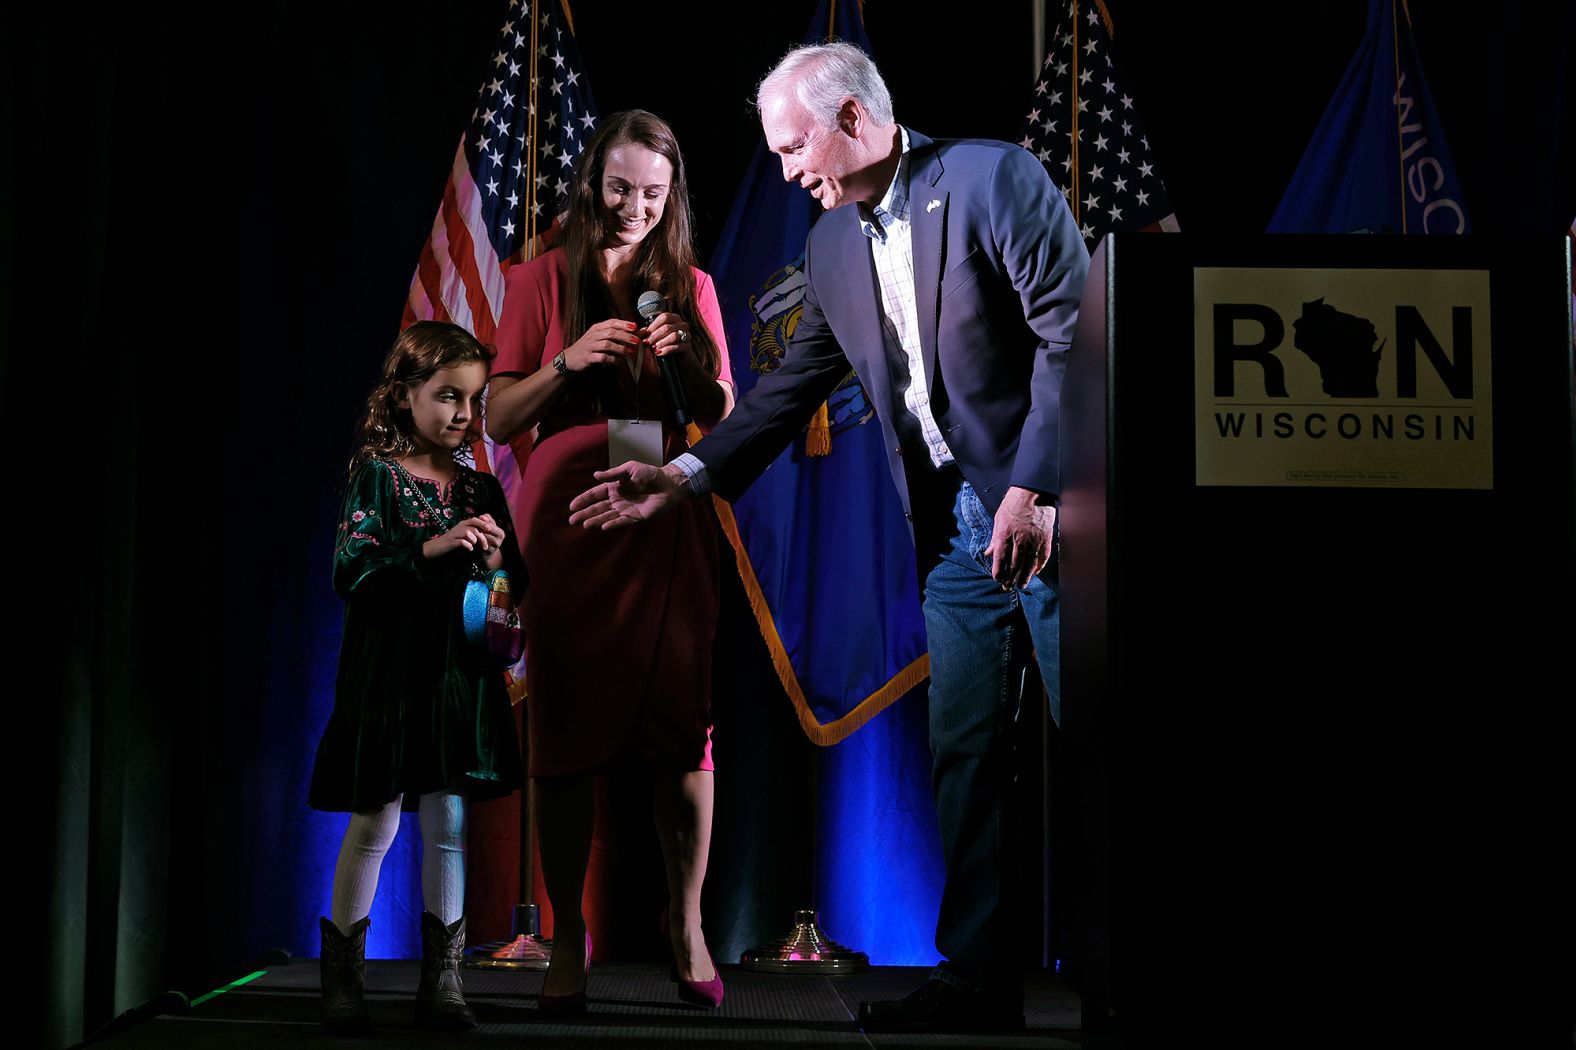 US Sen. Ron Johnson wishes his granddaughter Marit a happy seventh birthday during an election night party in Neenah, Wisconsin.